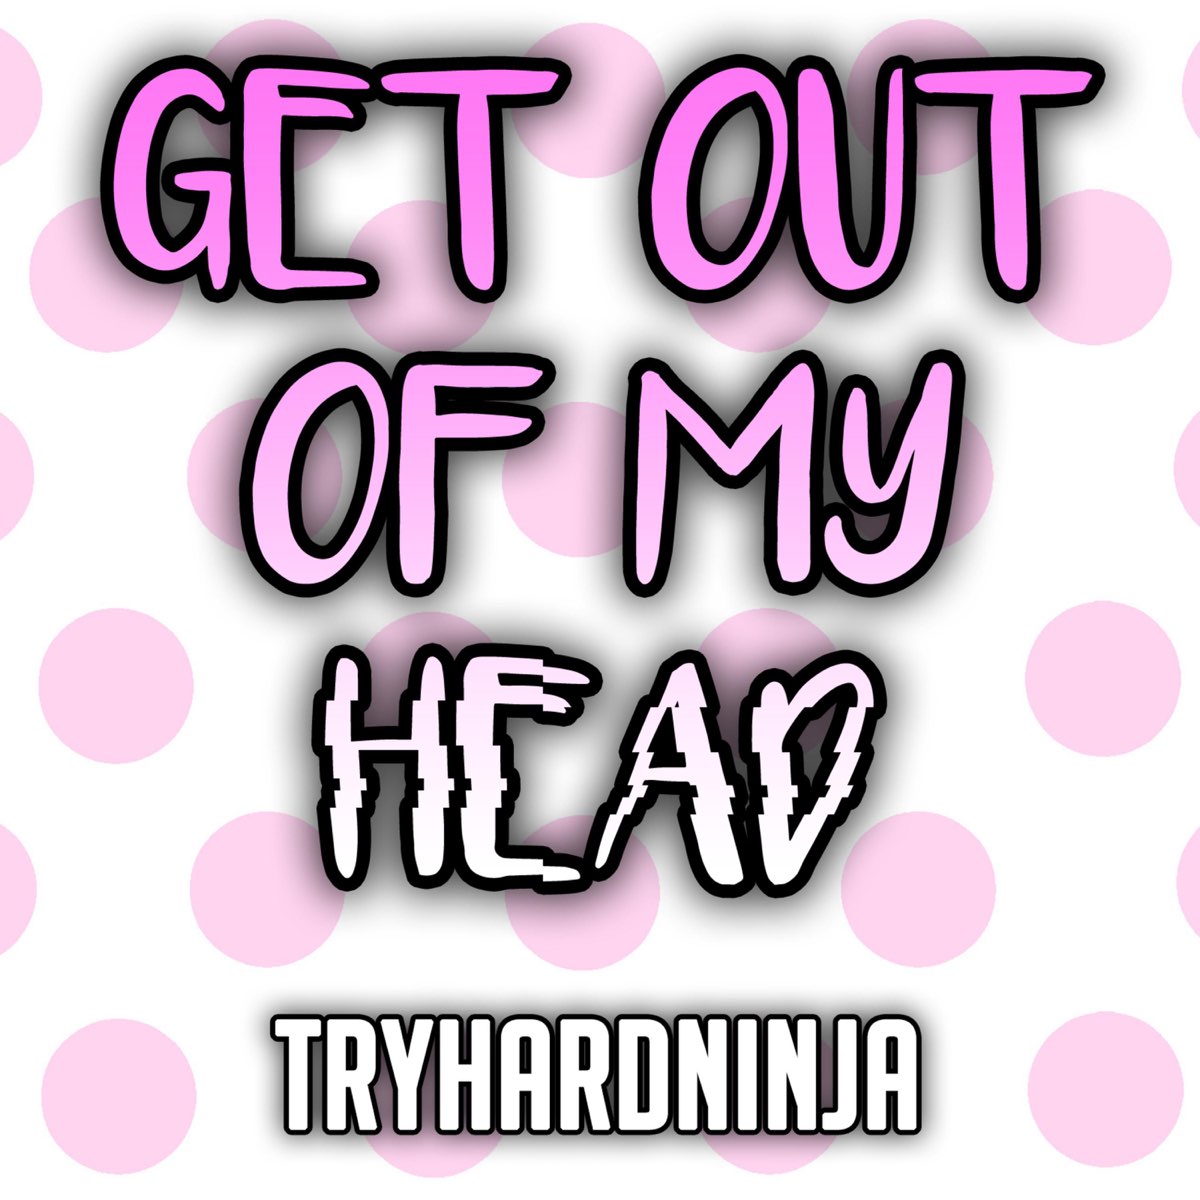 Can get out of my head перевод. Get out of my head. Get out надпись. TRYHARDNINJA-get out of my head. Надпись get out of my head.